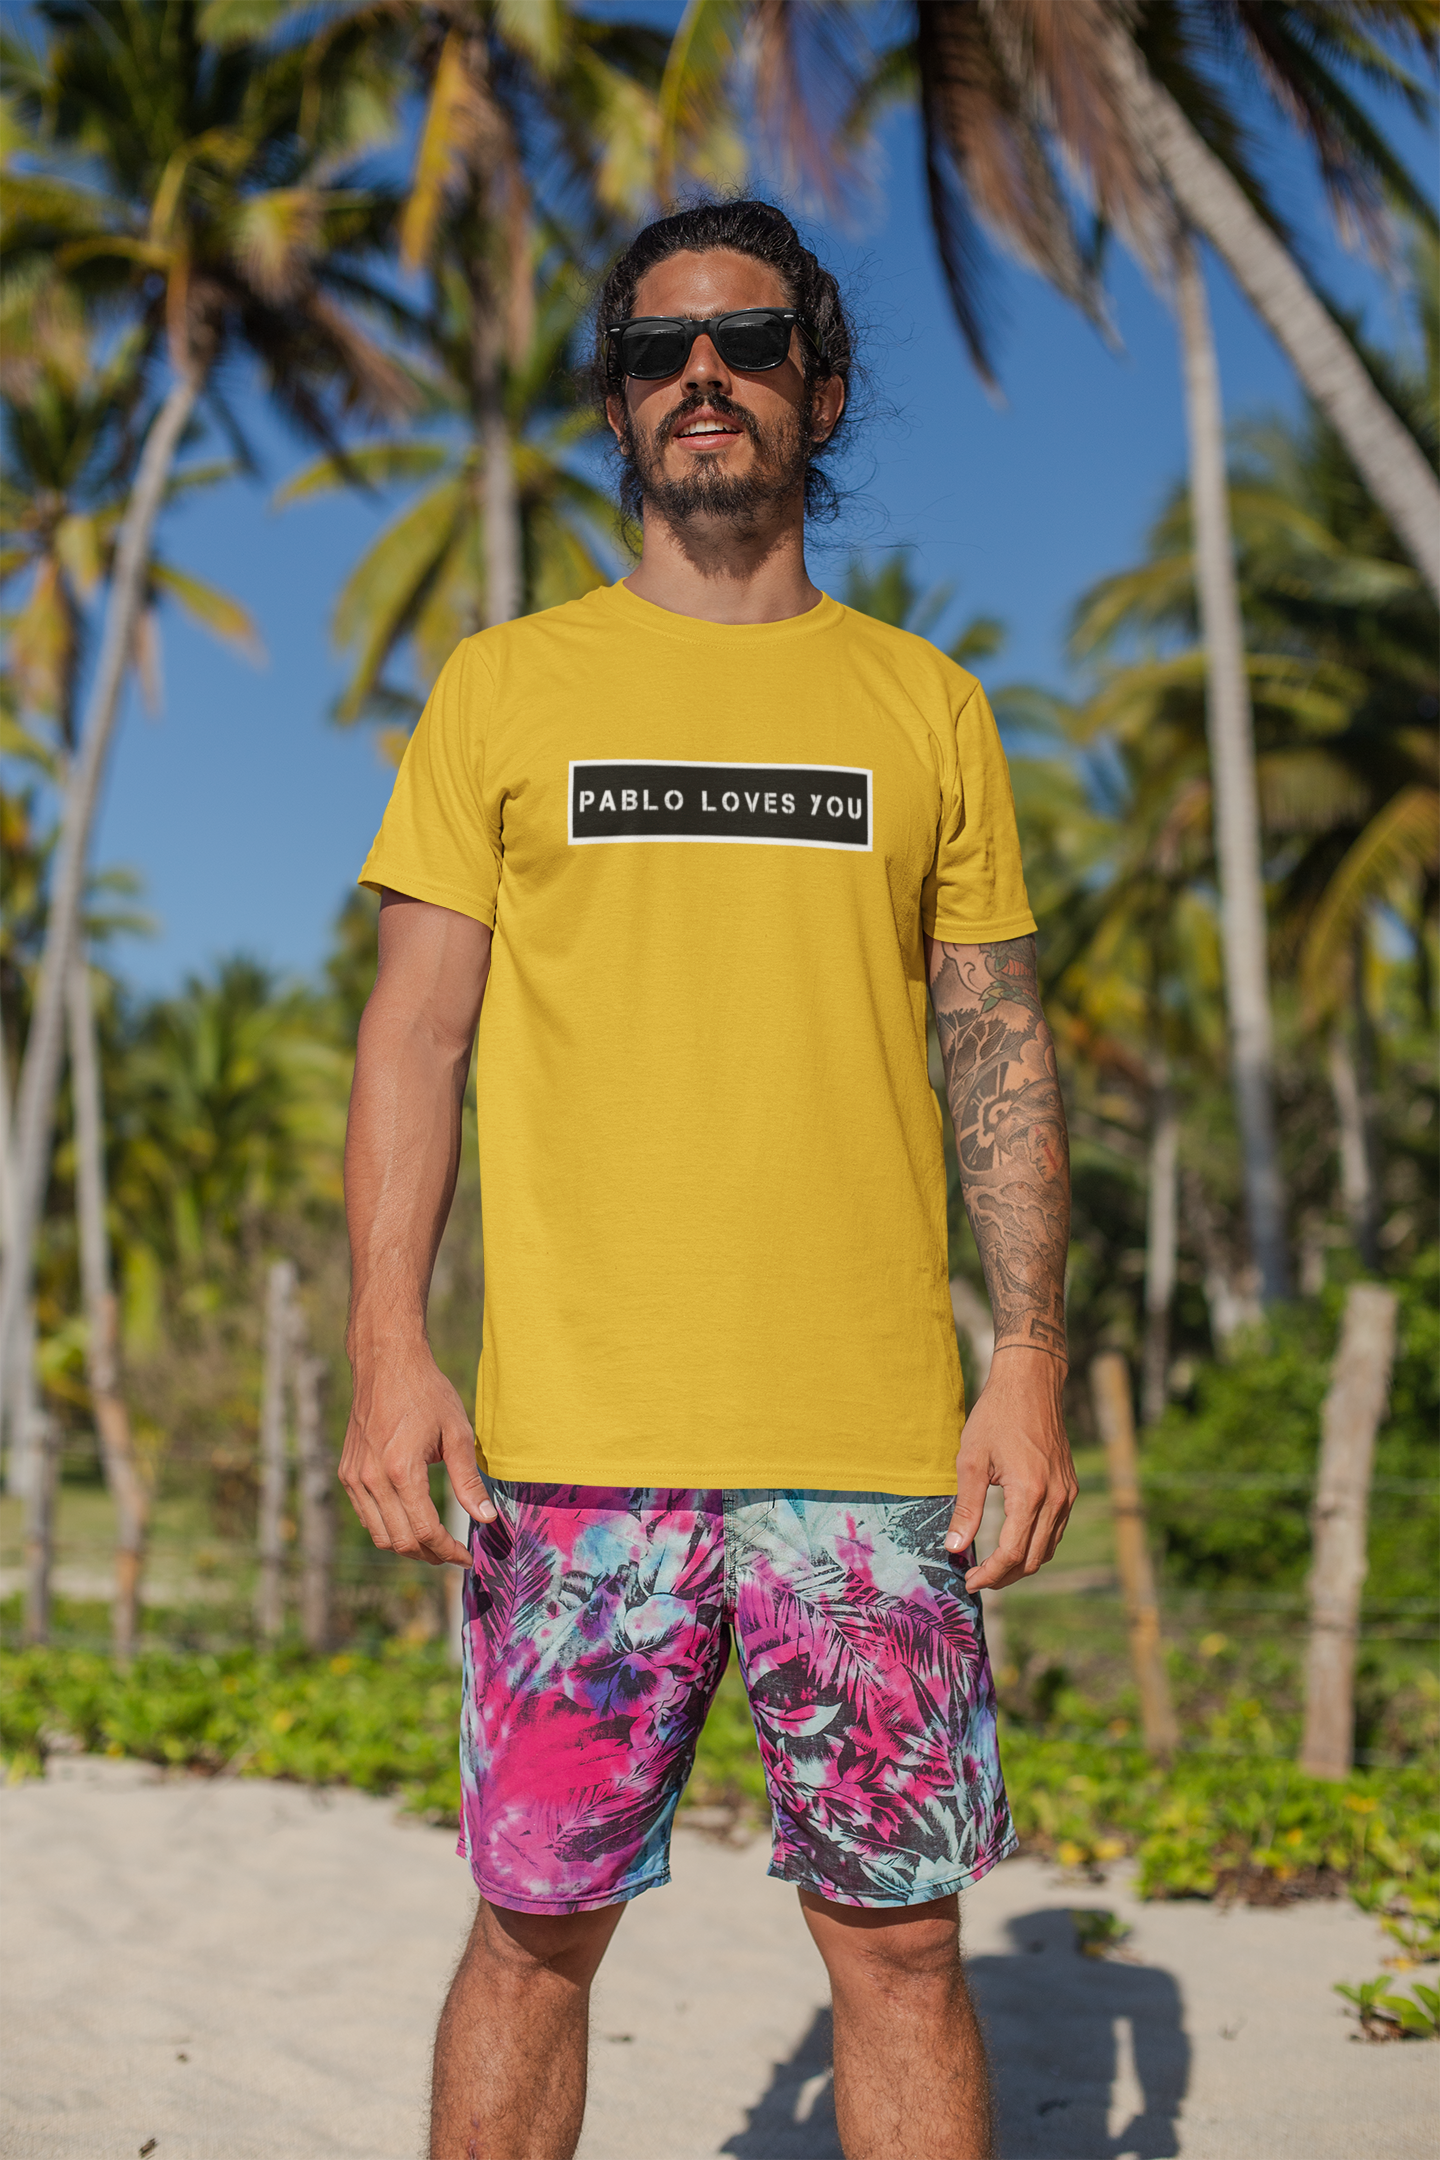 PABLO LOVES YOU - HALF-SLEEVE T-SHIRTS YELLOW